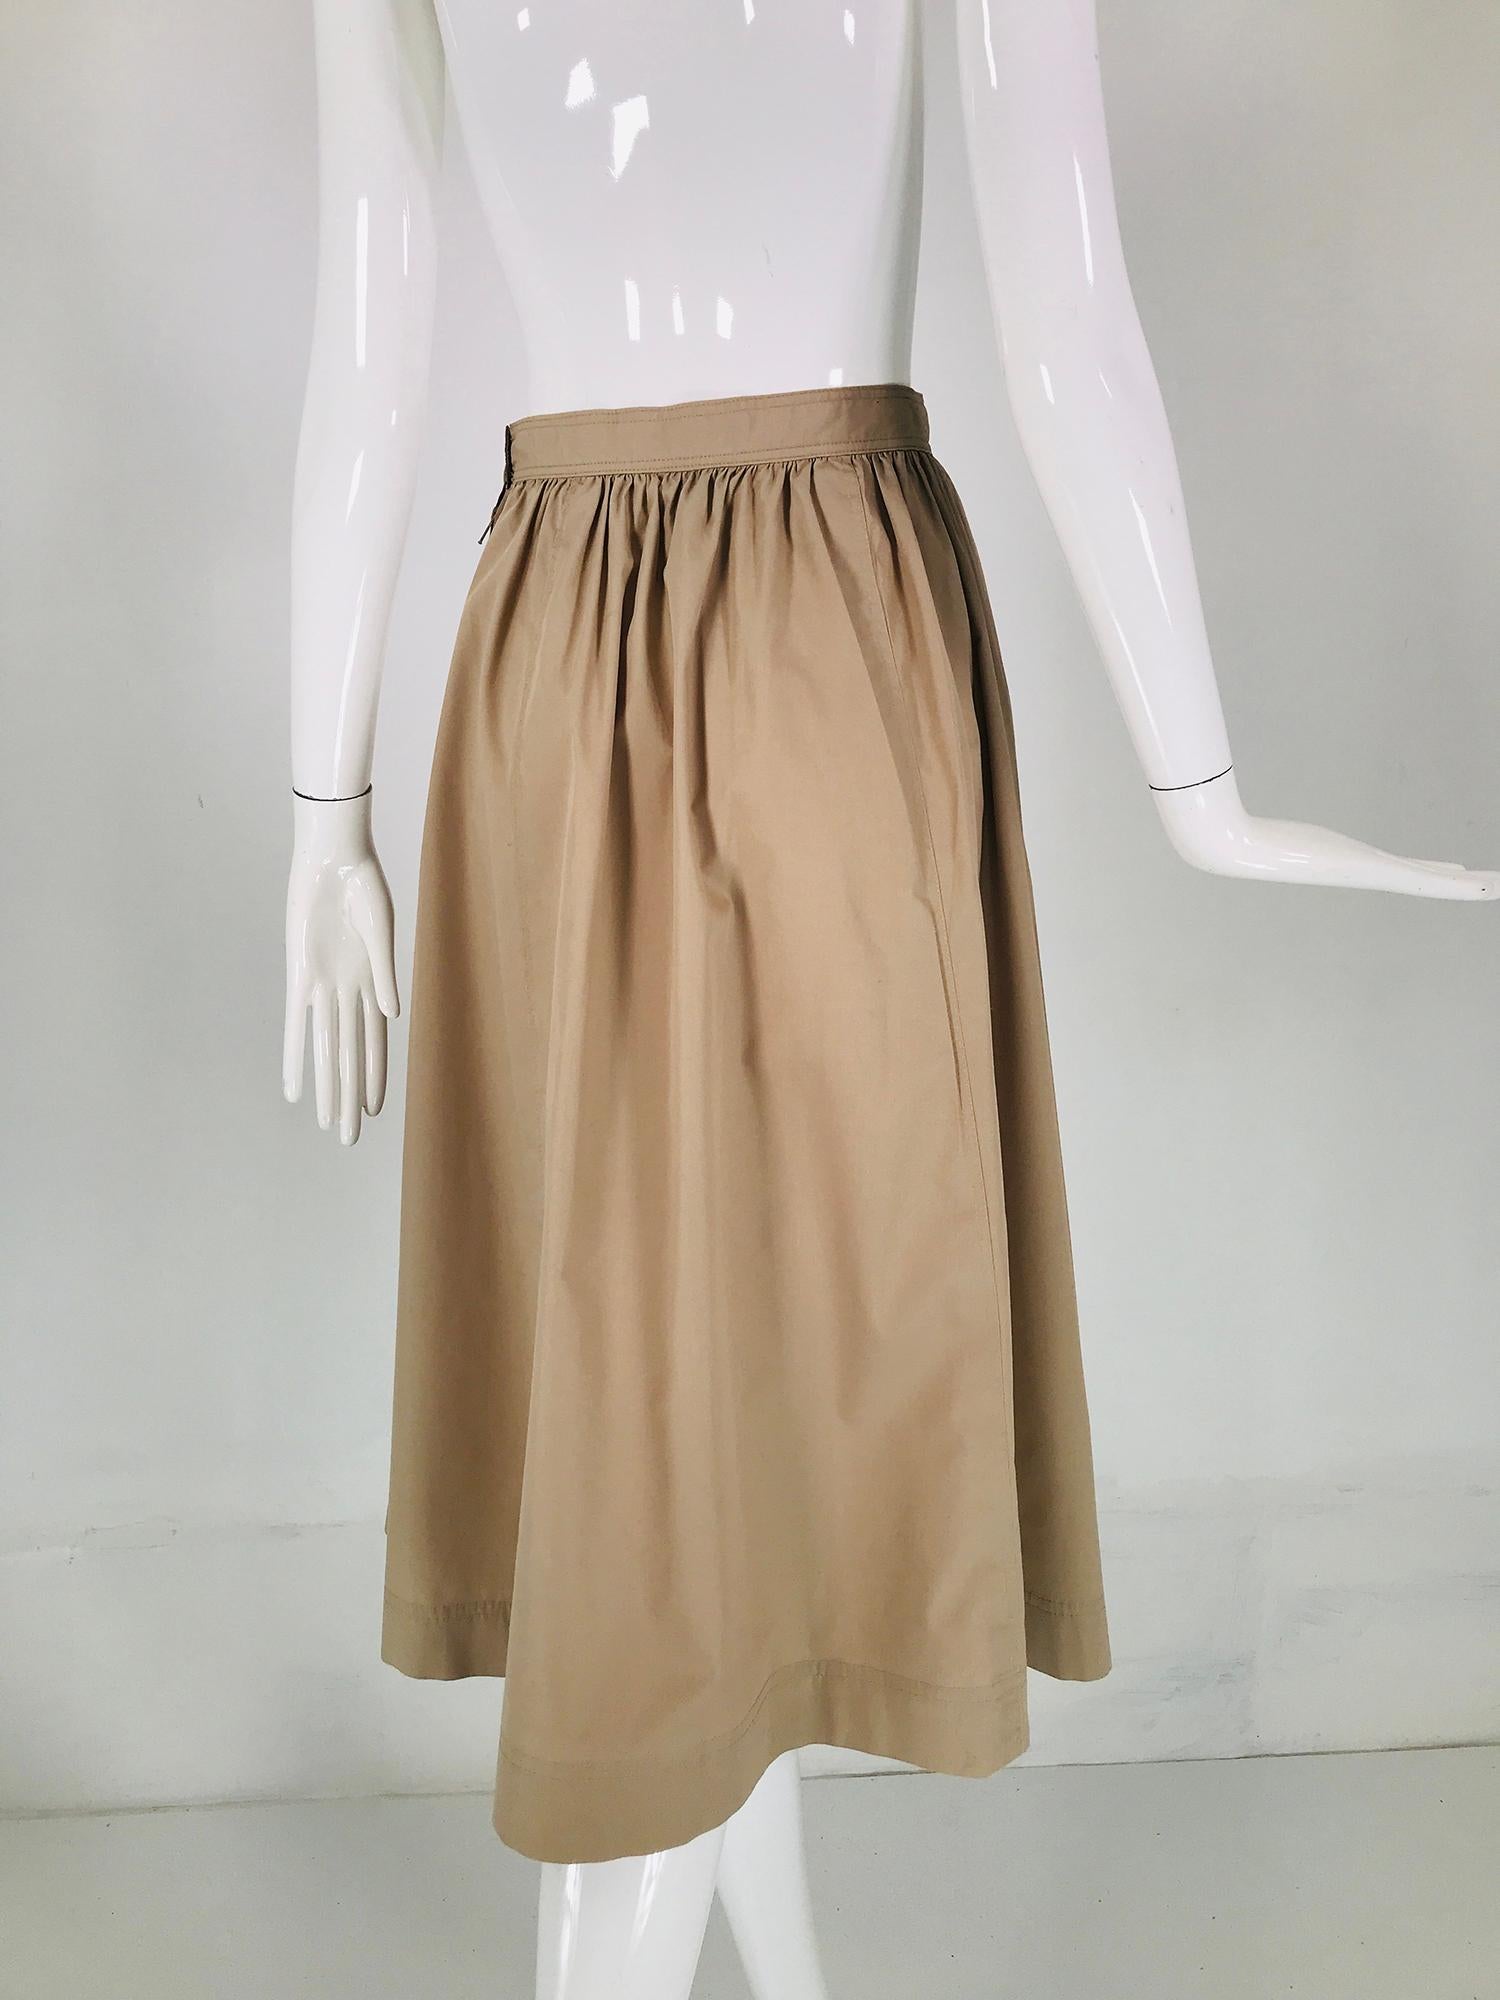 Brown Vintage Chanel Tan Poplin Gathered Skirt with Button Pockets